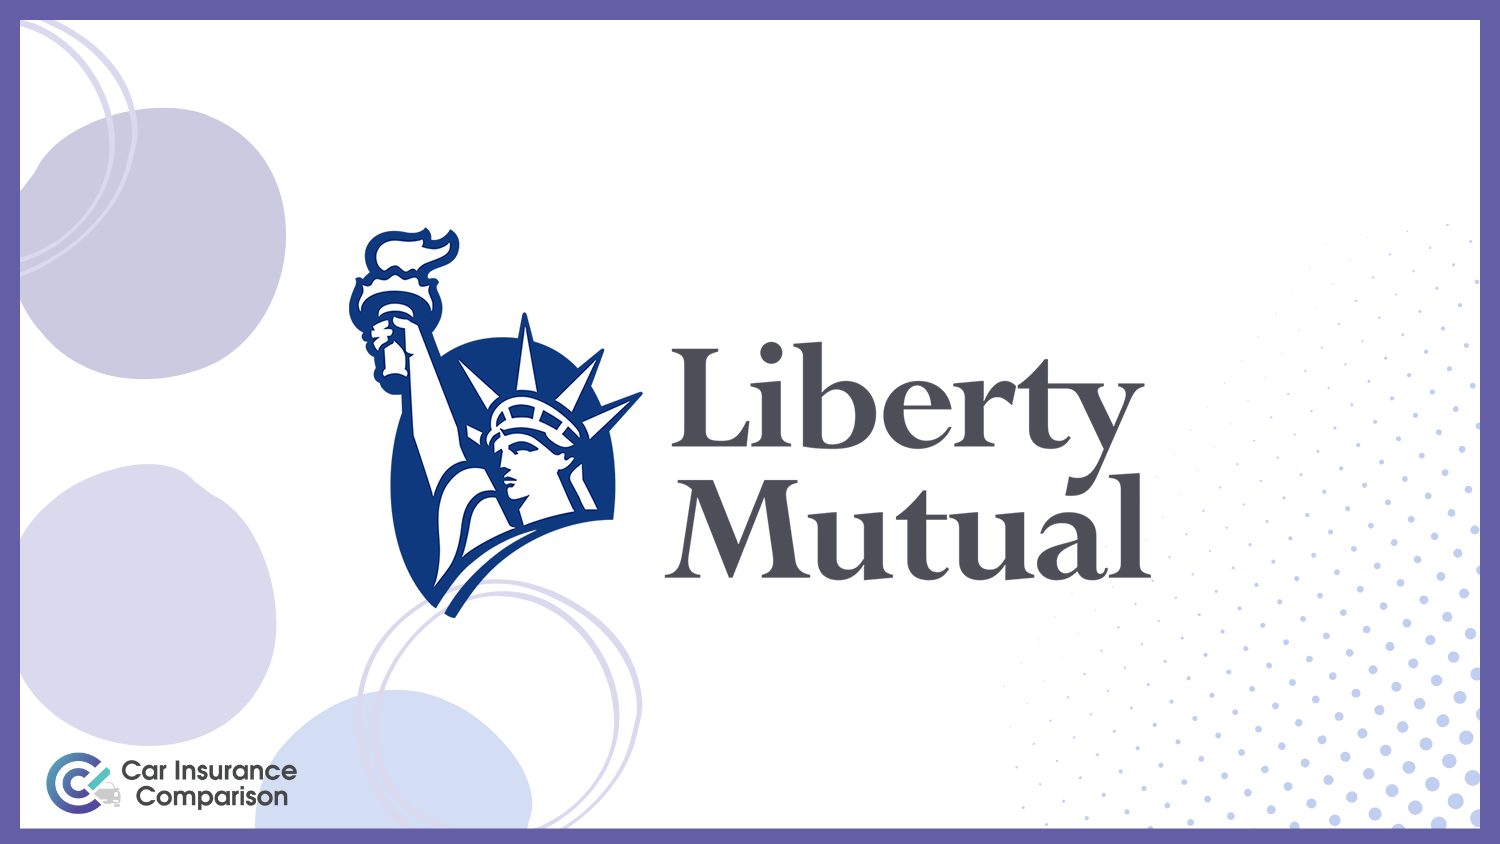 Liberty Mutual: Best Car Insurance for Home-Care Worker